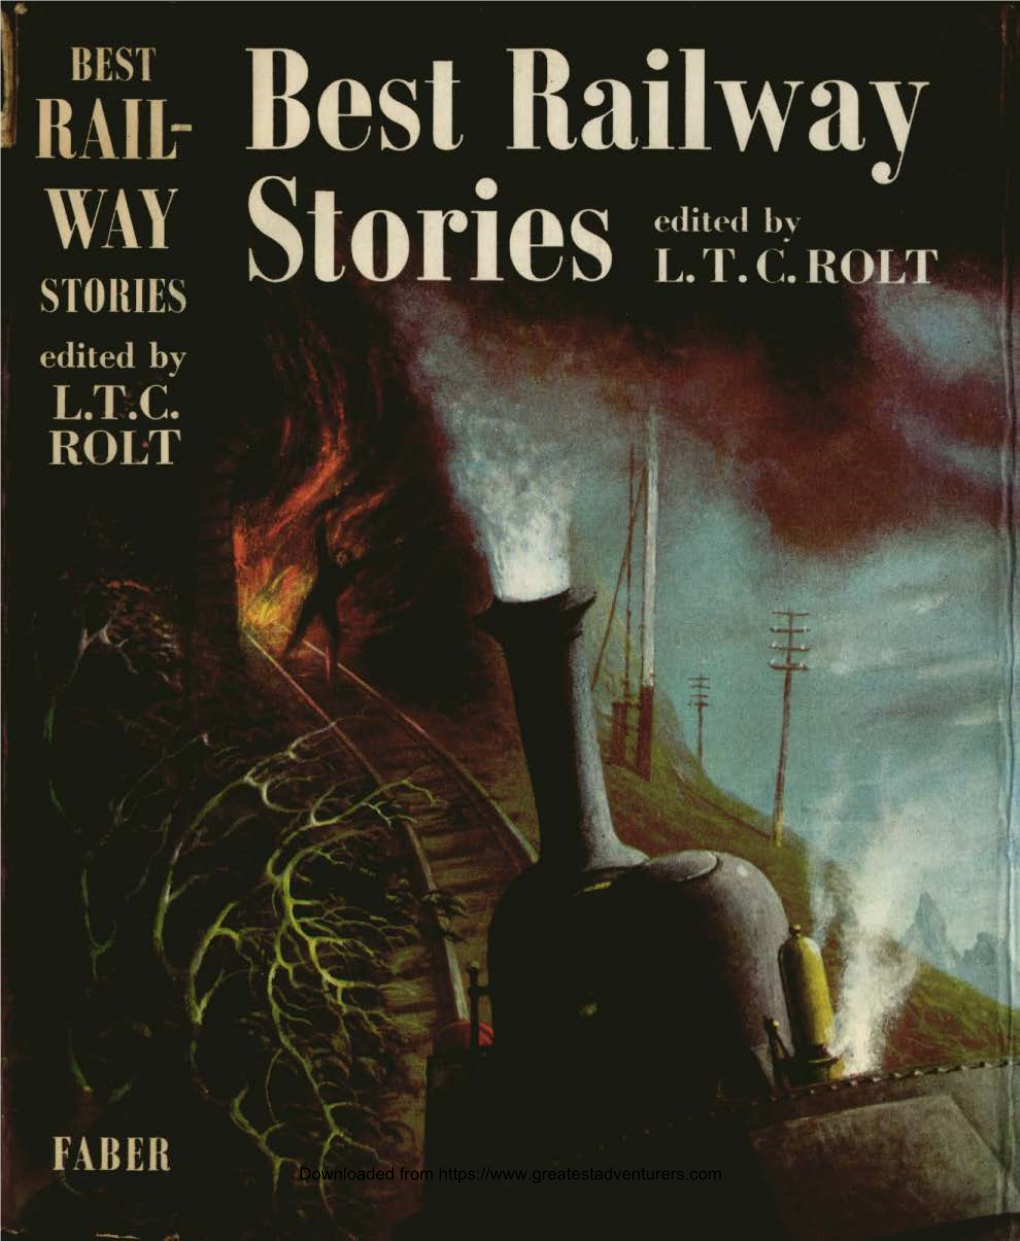 BEST RAILWAY STORIES TEN of the BEST Selected Short Stories Edited by L